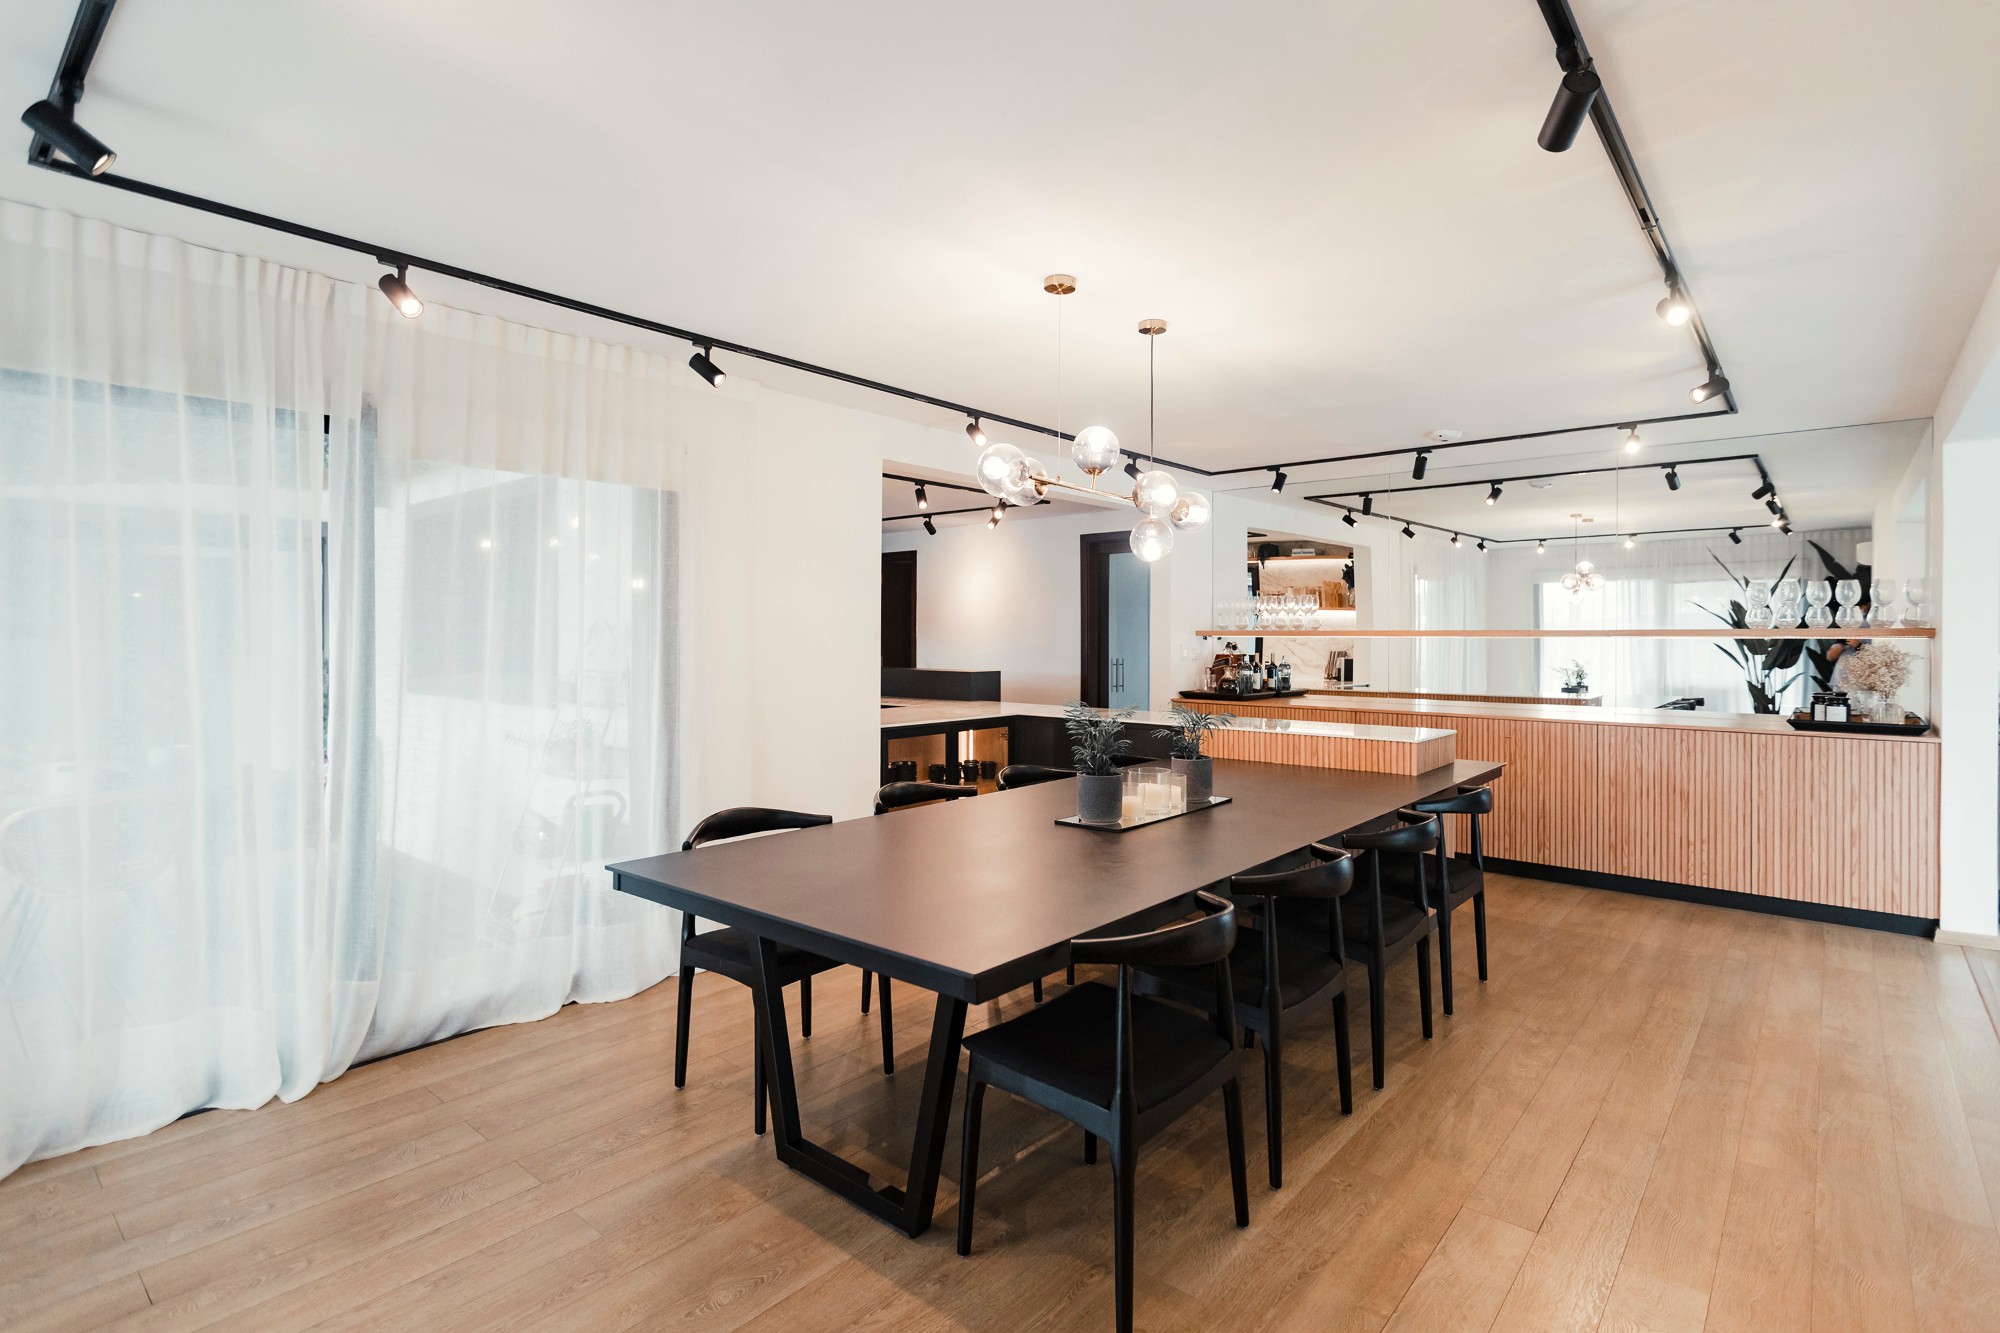 Image of IMG 6609 in Kitchen and dining room merged by a precise design - Cosentino